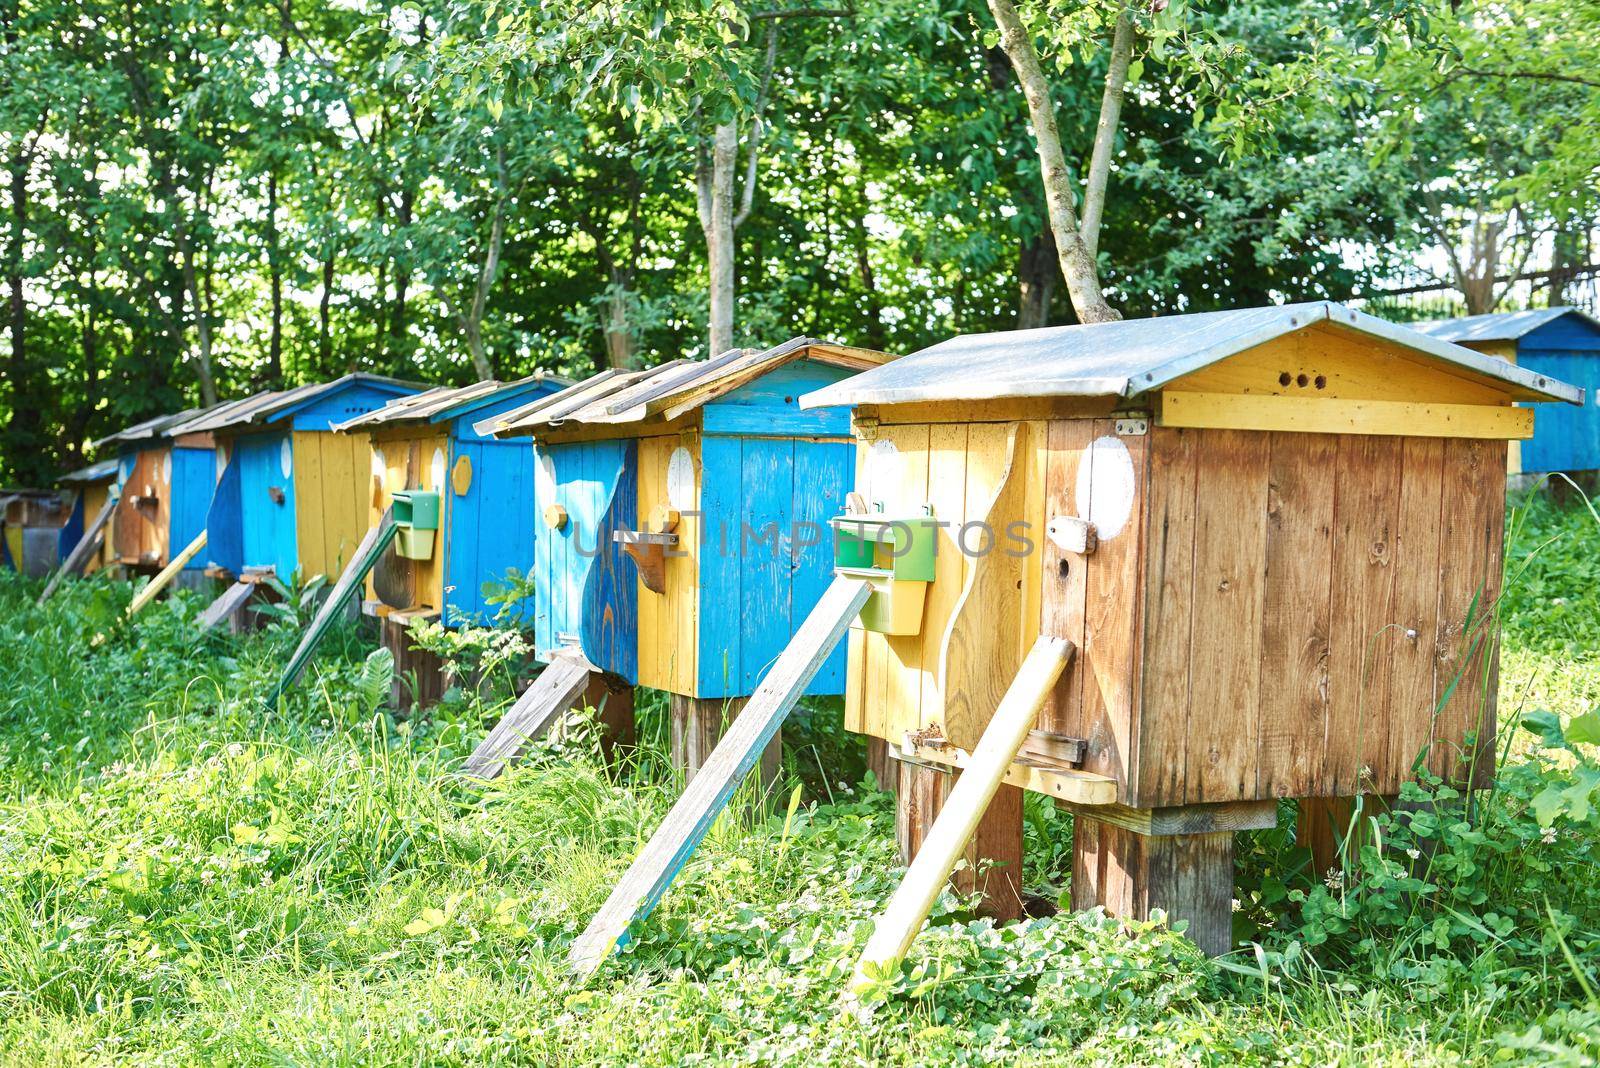 Row of beehives set in a garden beekeeping apiary apiculture honey produce crafting lifestyle natural organic concept.